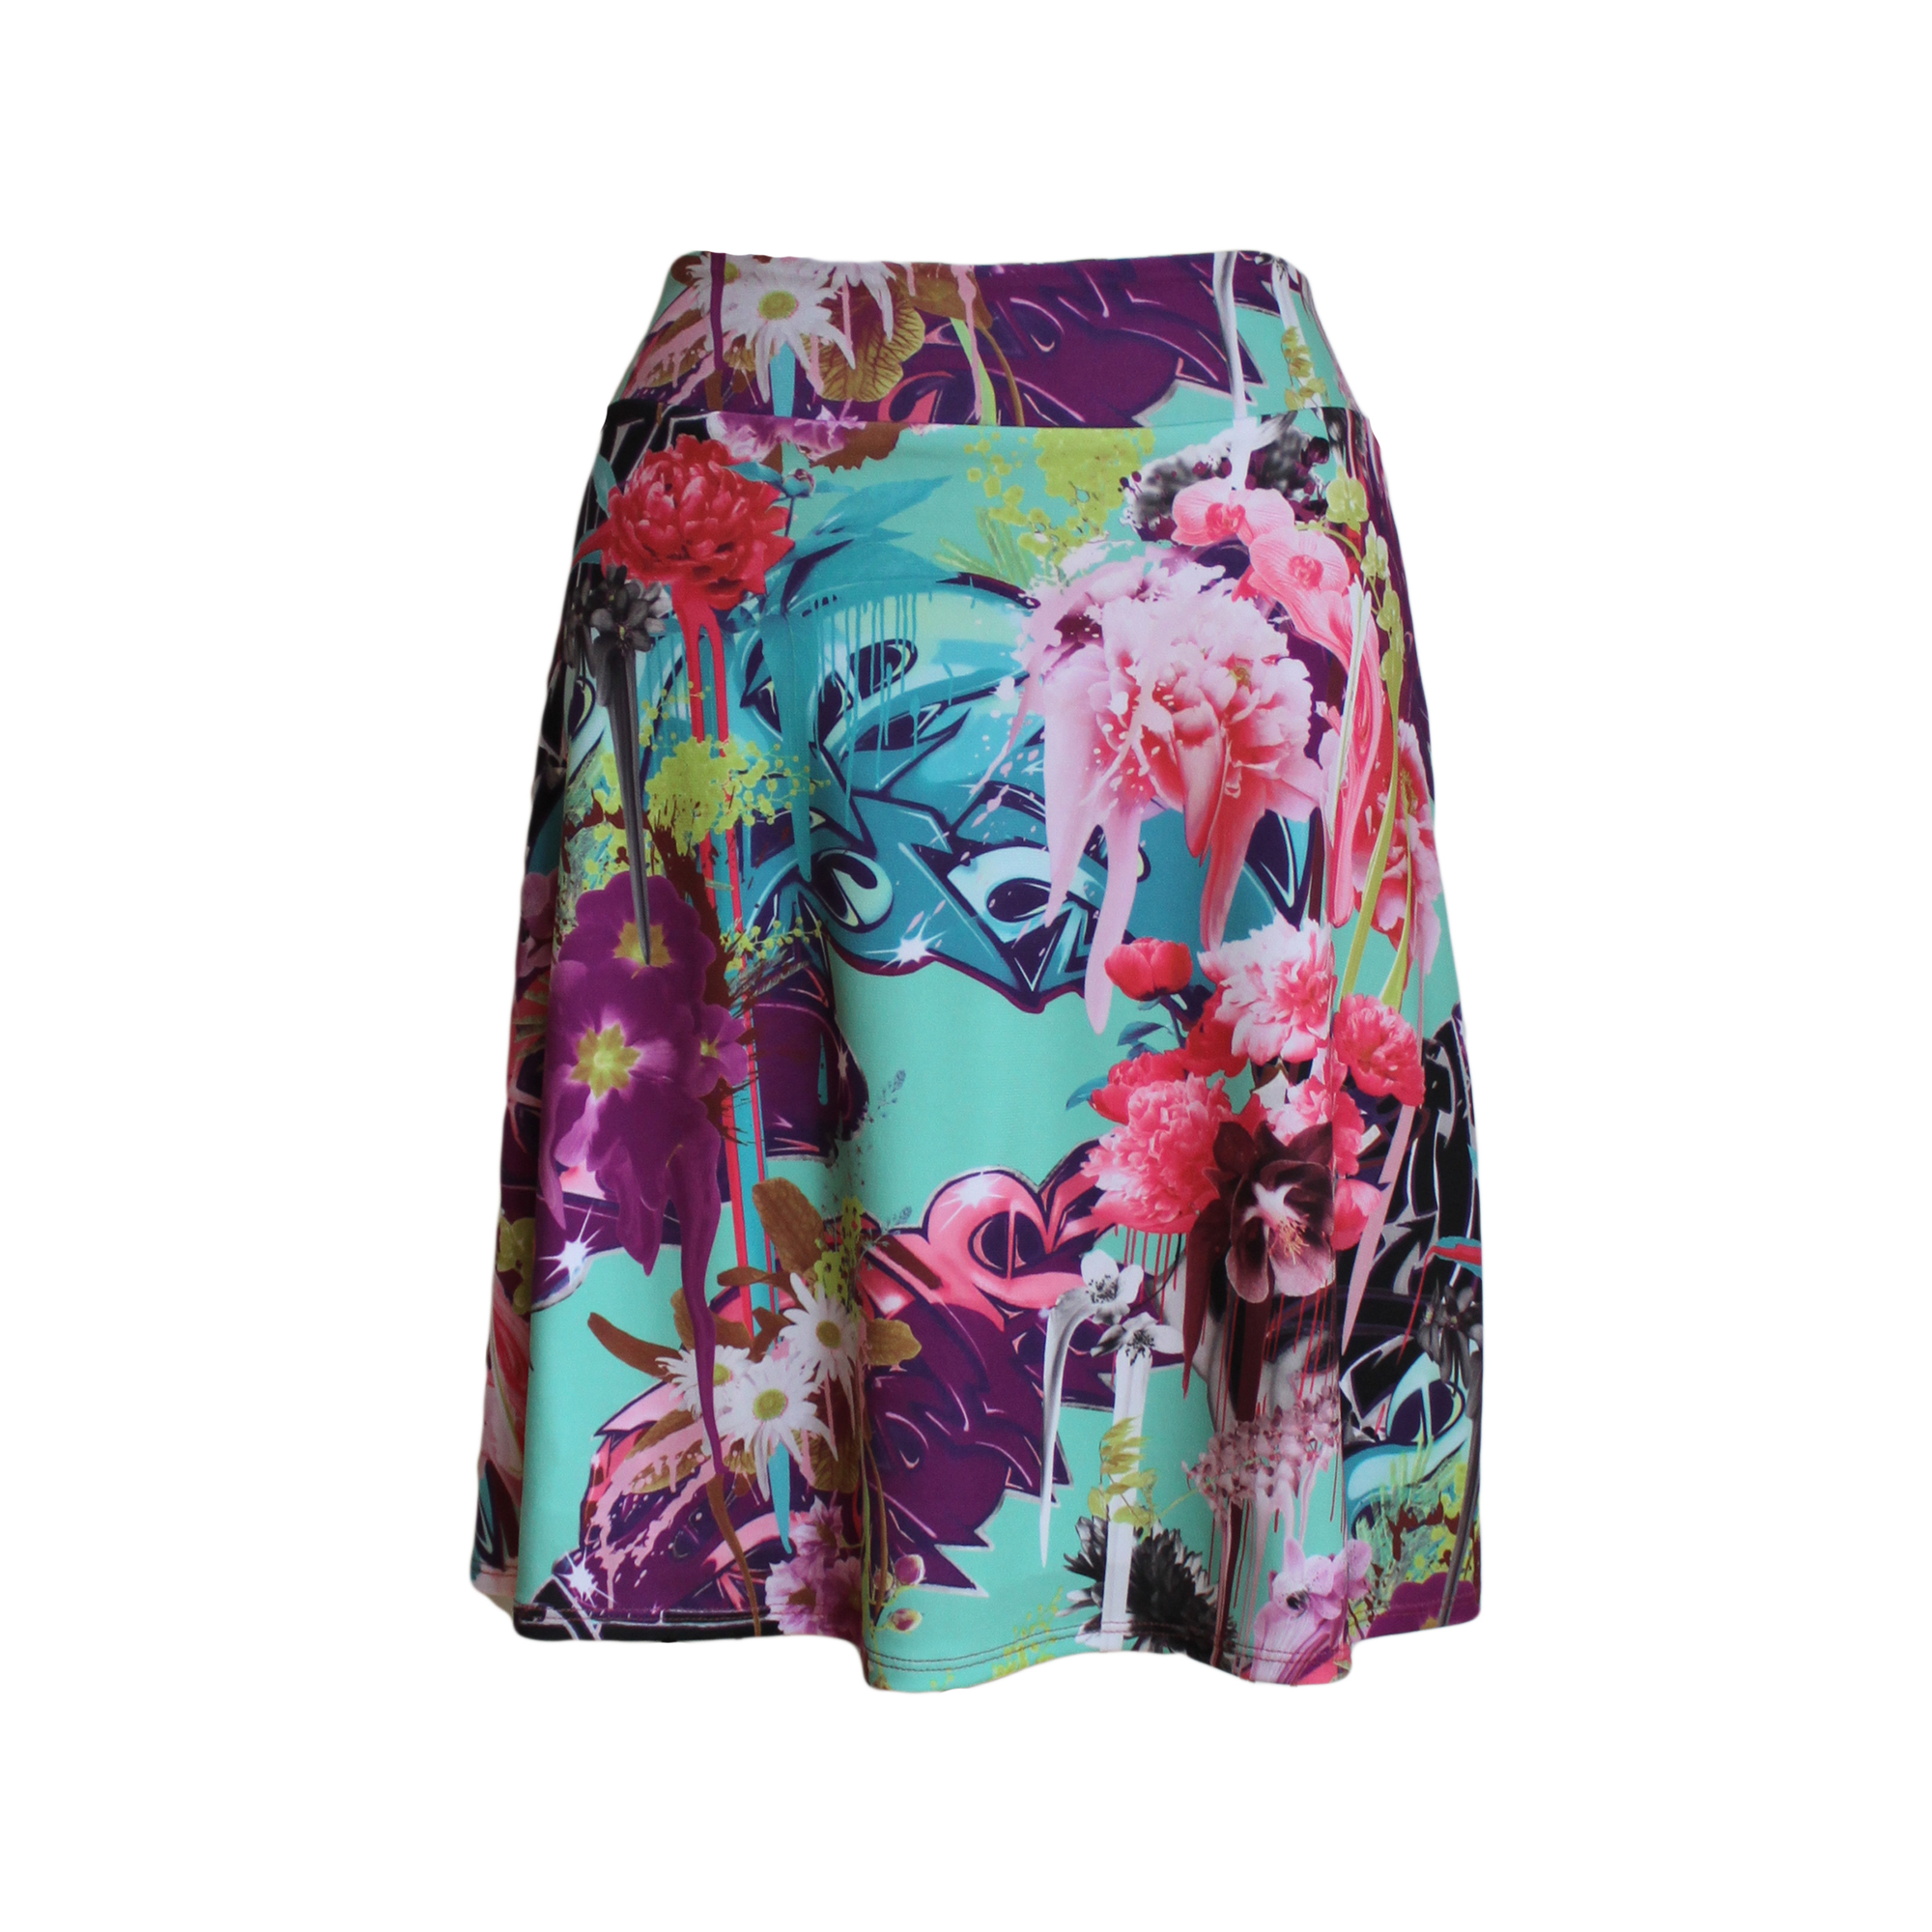 Shop > A-LINE SKIRTS > Travel Skirt in Bright Pink and Mint, Graffiti ...